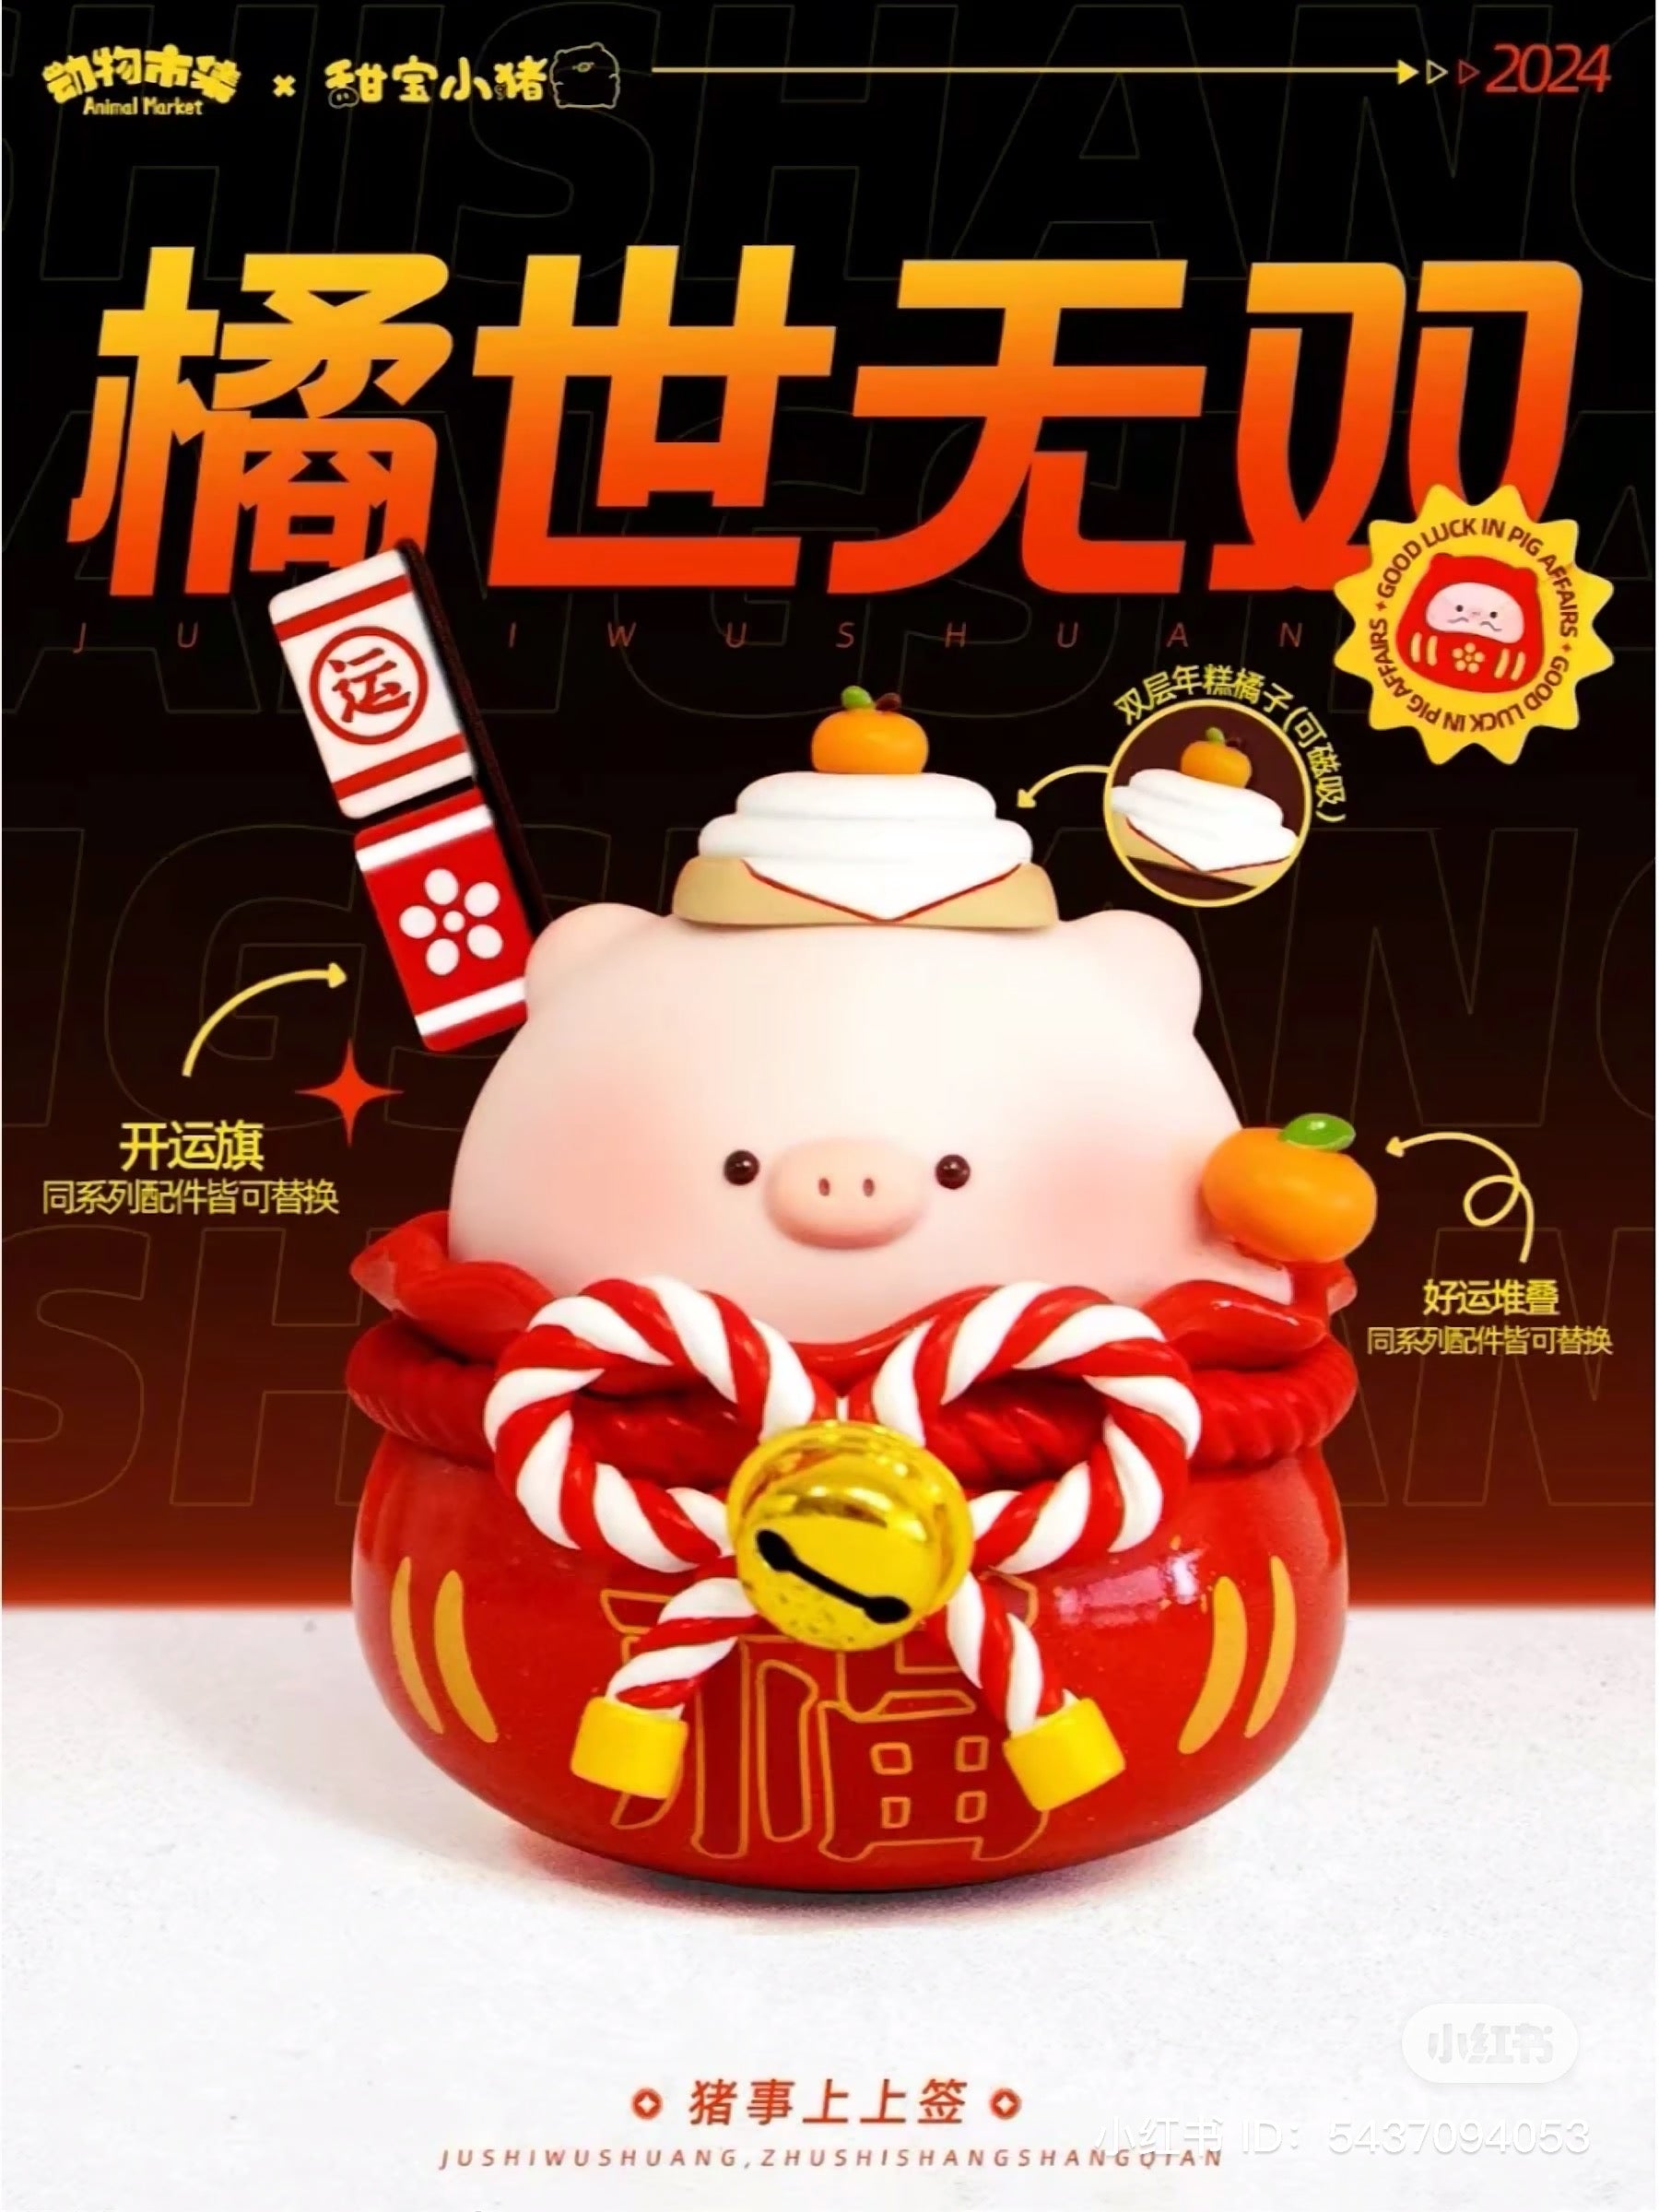 Timbo - Everything's Going Well Blind Box Series: A toy pig figurine in a red bowl with a bell and cartoon character label.